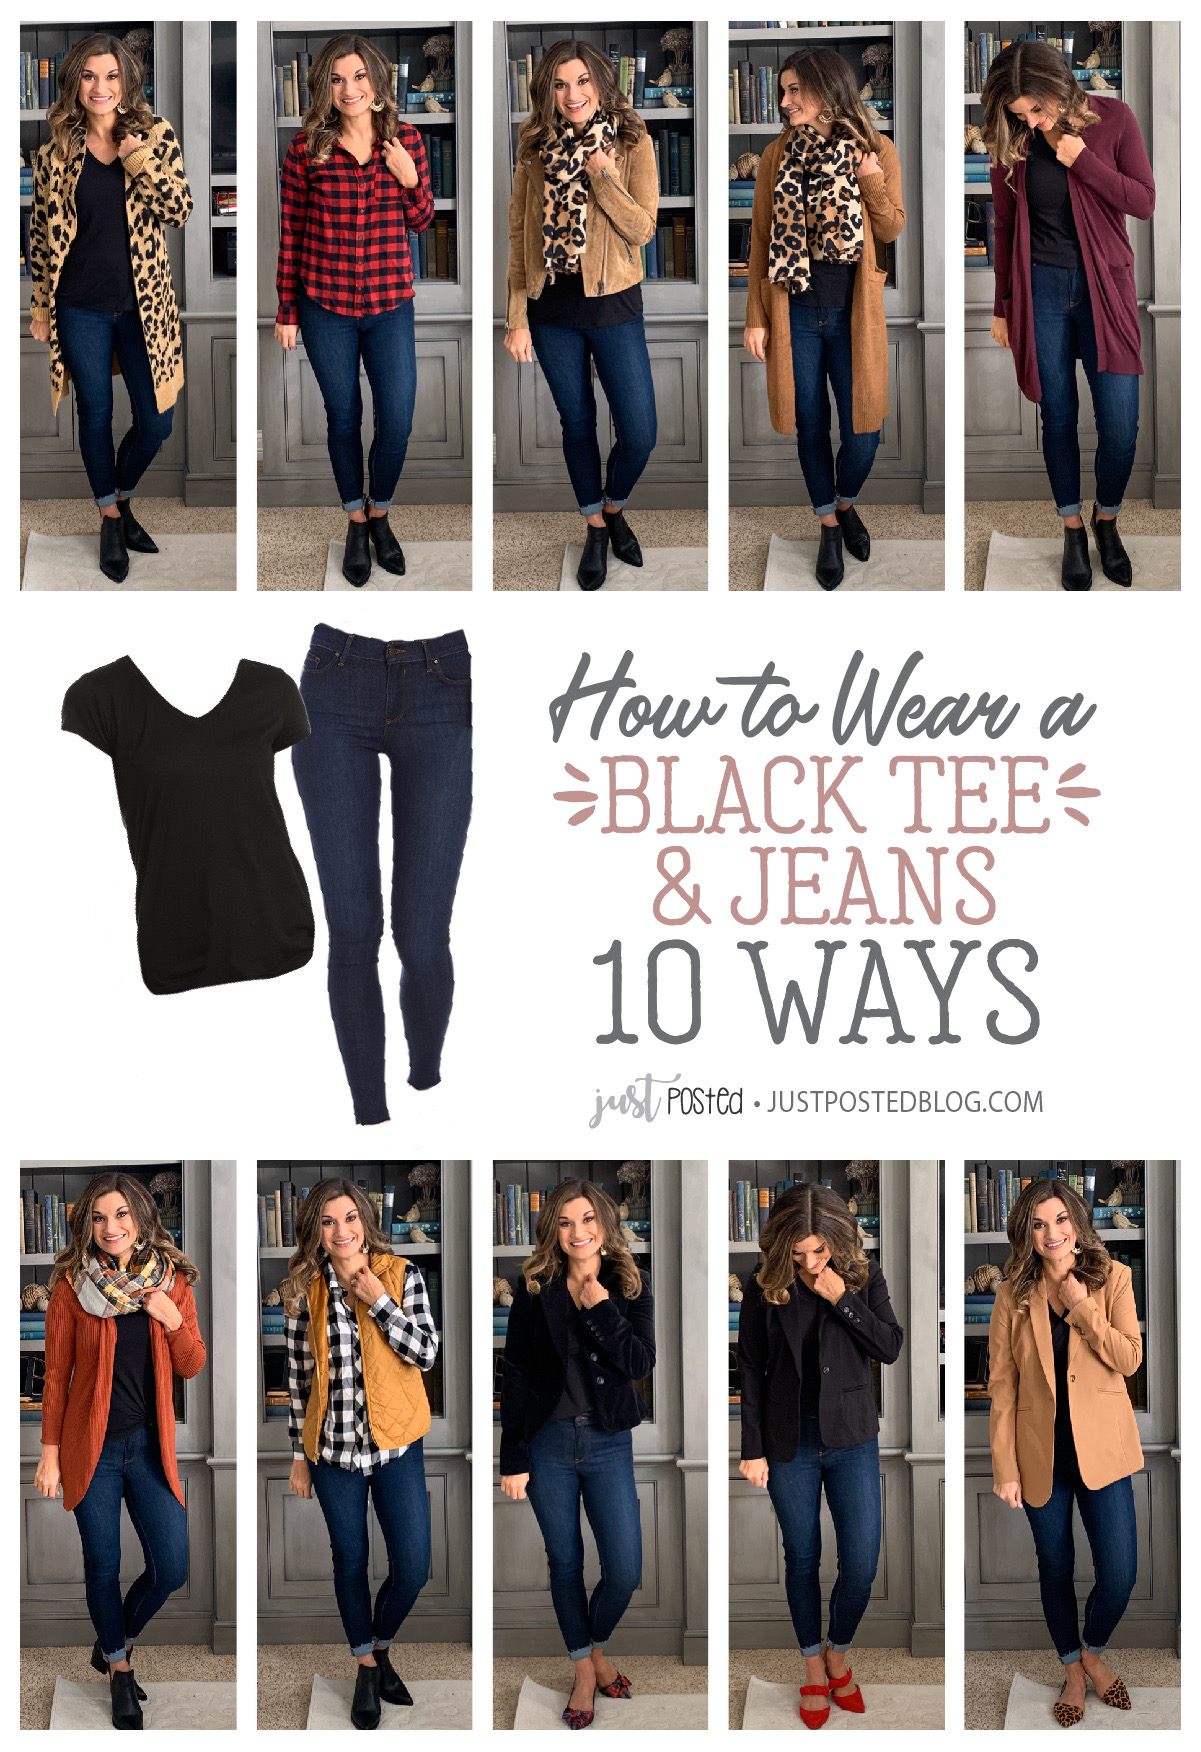 6 Ways to Wear Black Jeans - Straight A Style